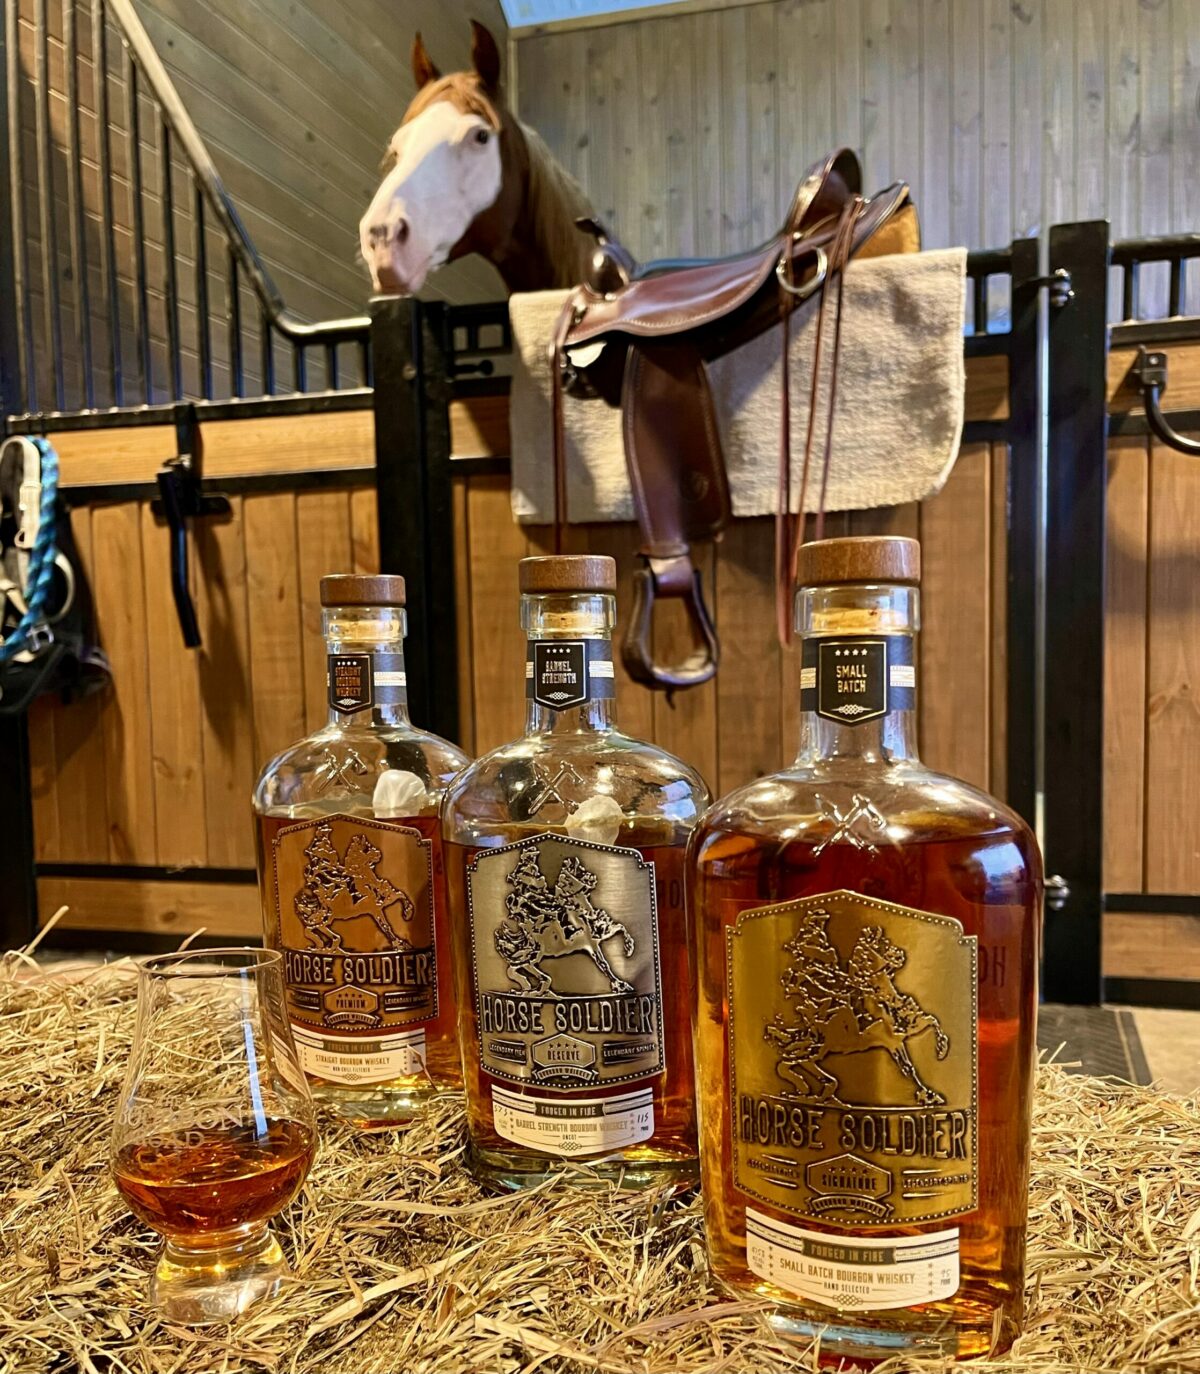 A salute to Horse Soldier Bourbon